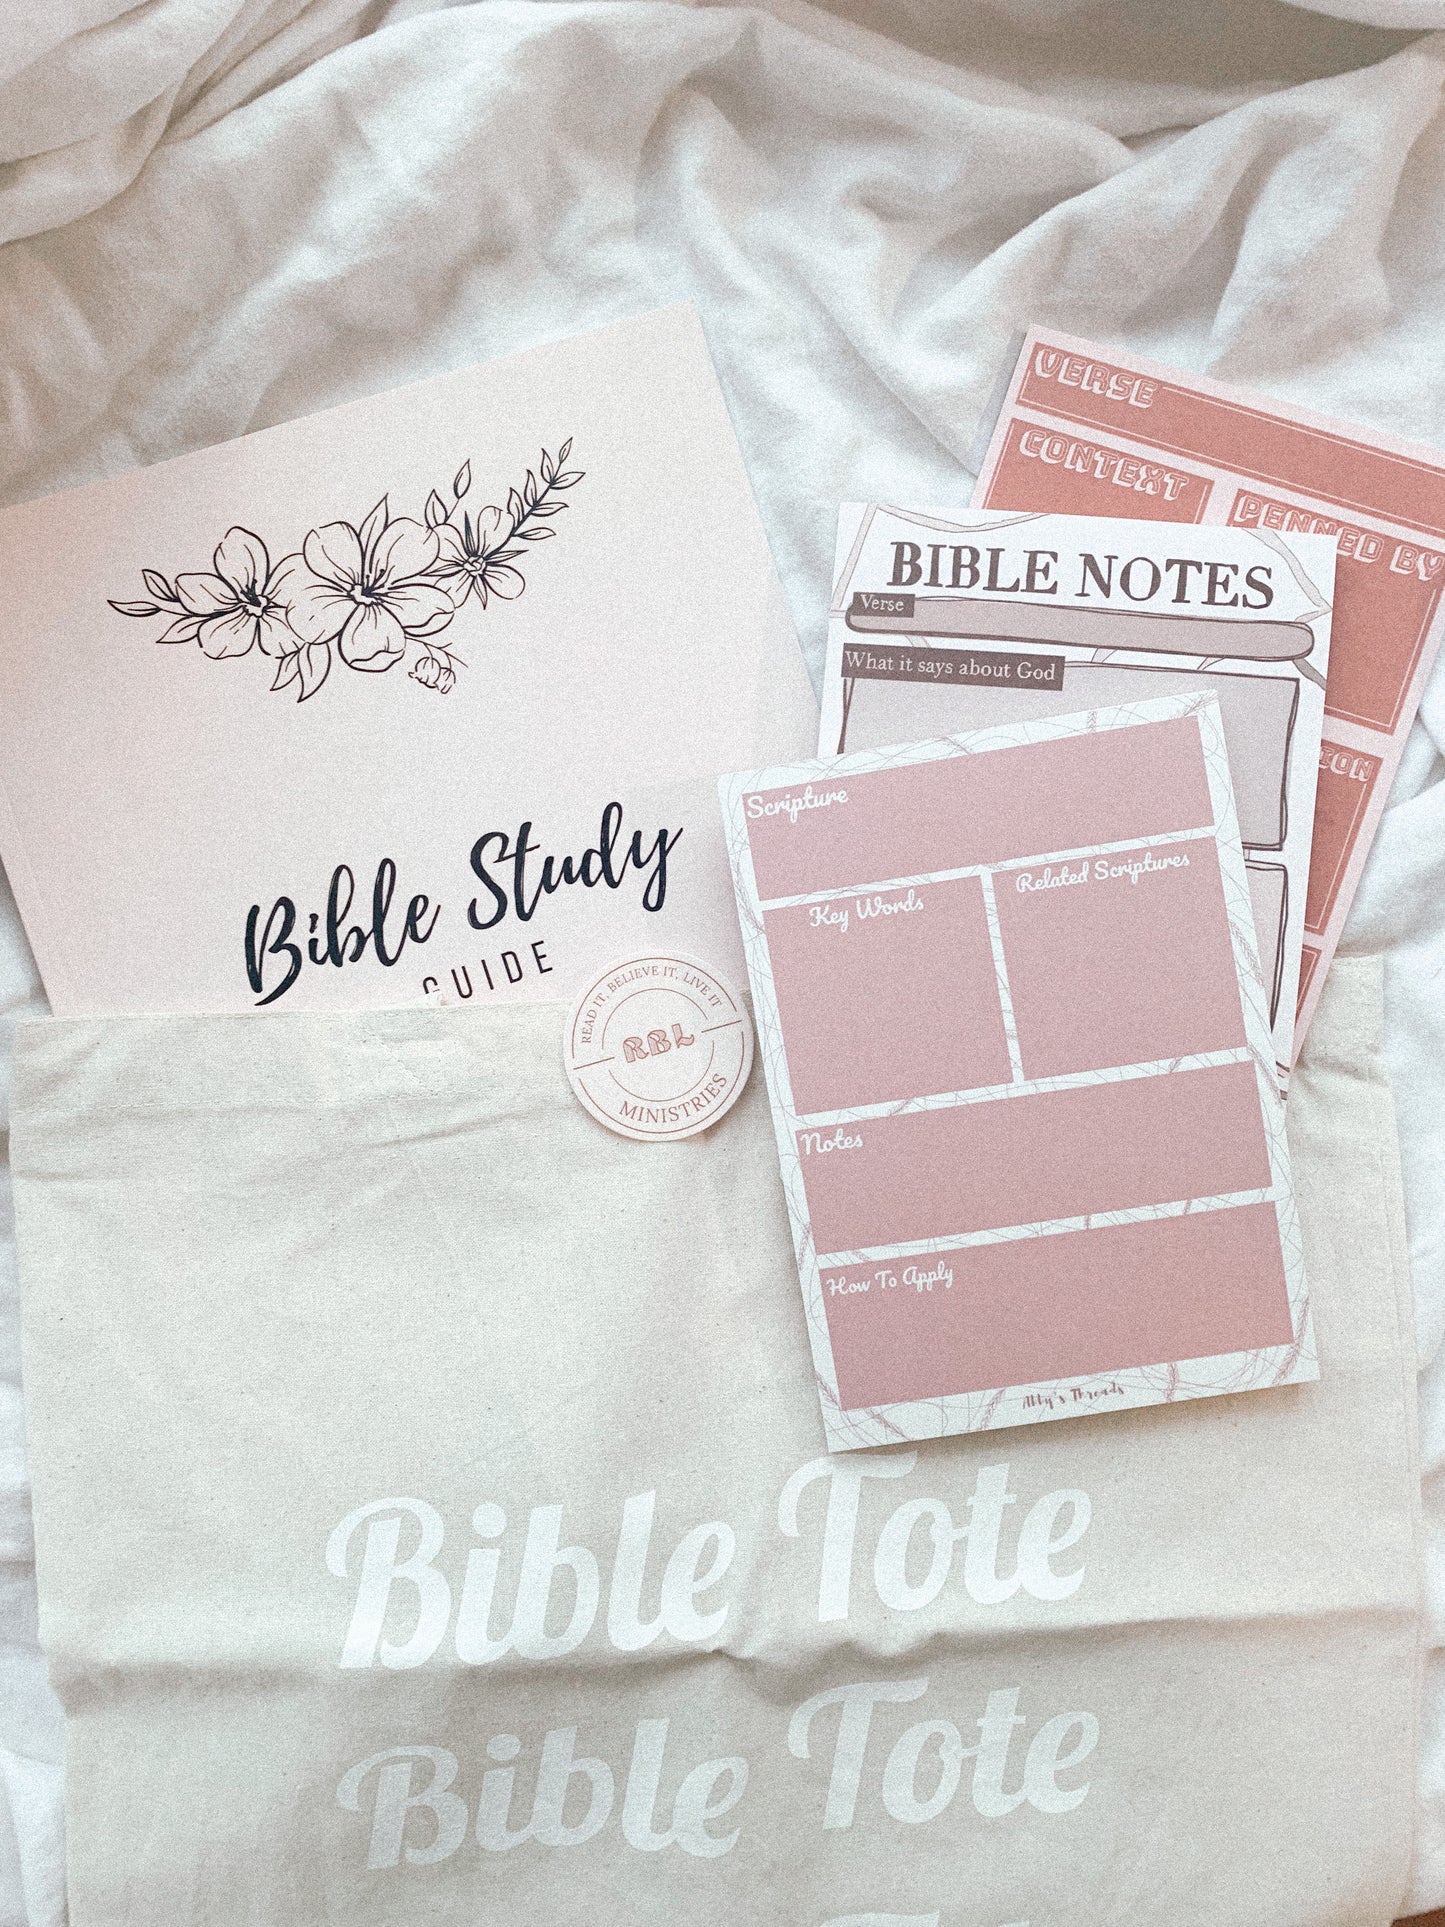 Bible Study Starter Bundle (over $70 in value!) - RBL Ministries